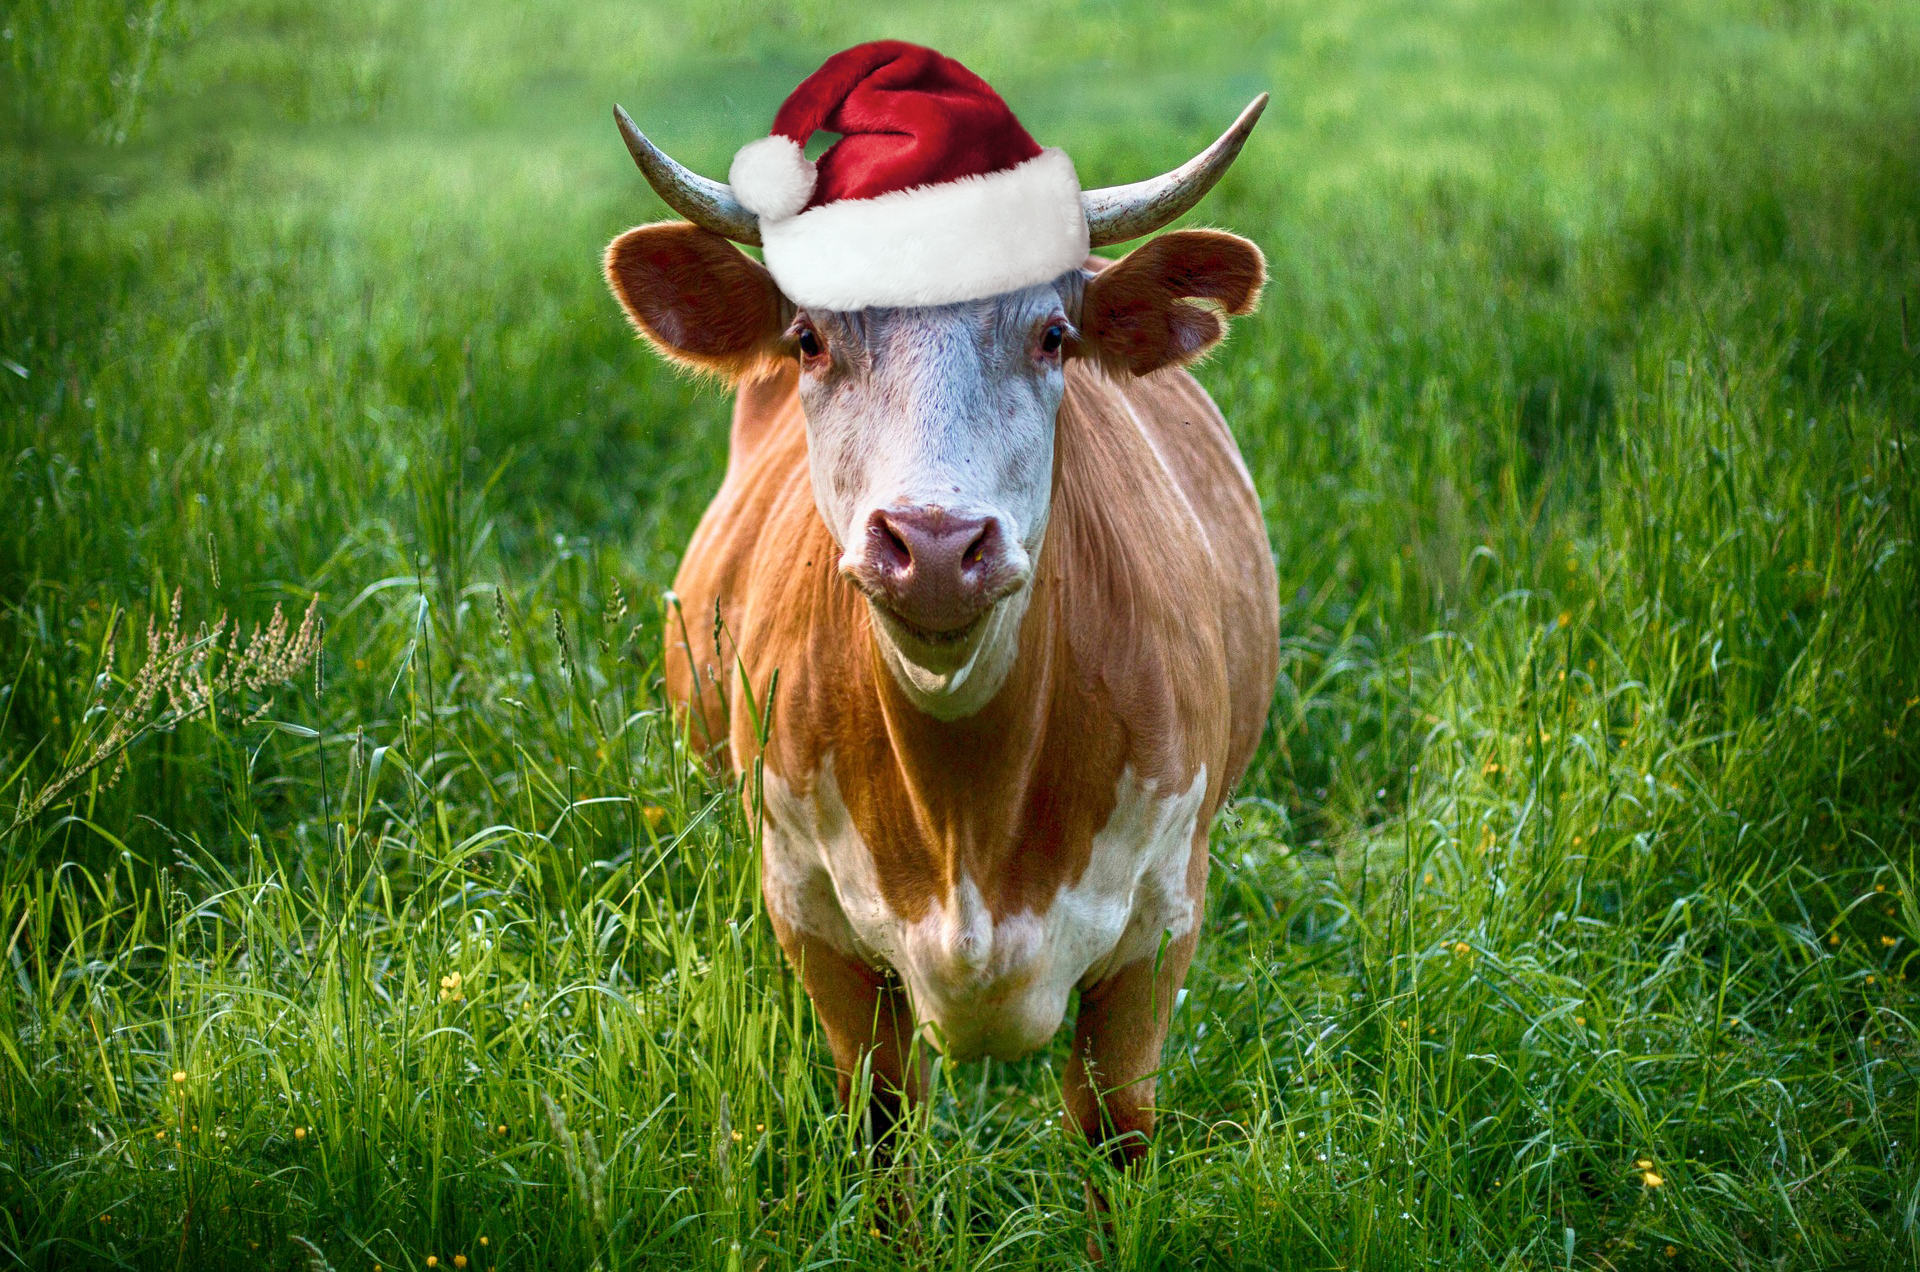 Run with the Bulls in The Valley Of Lights This Christmas?